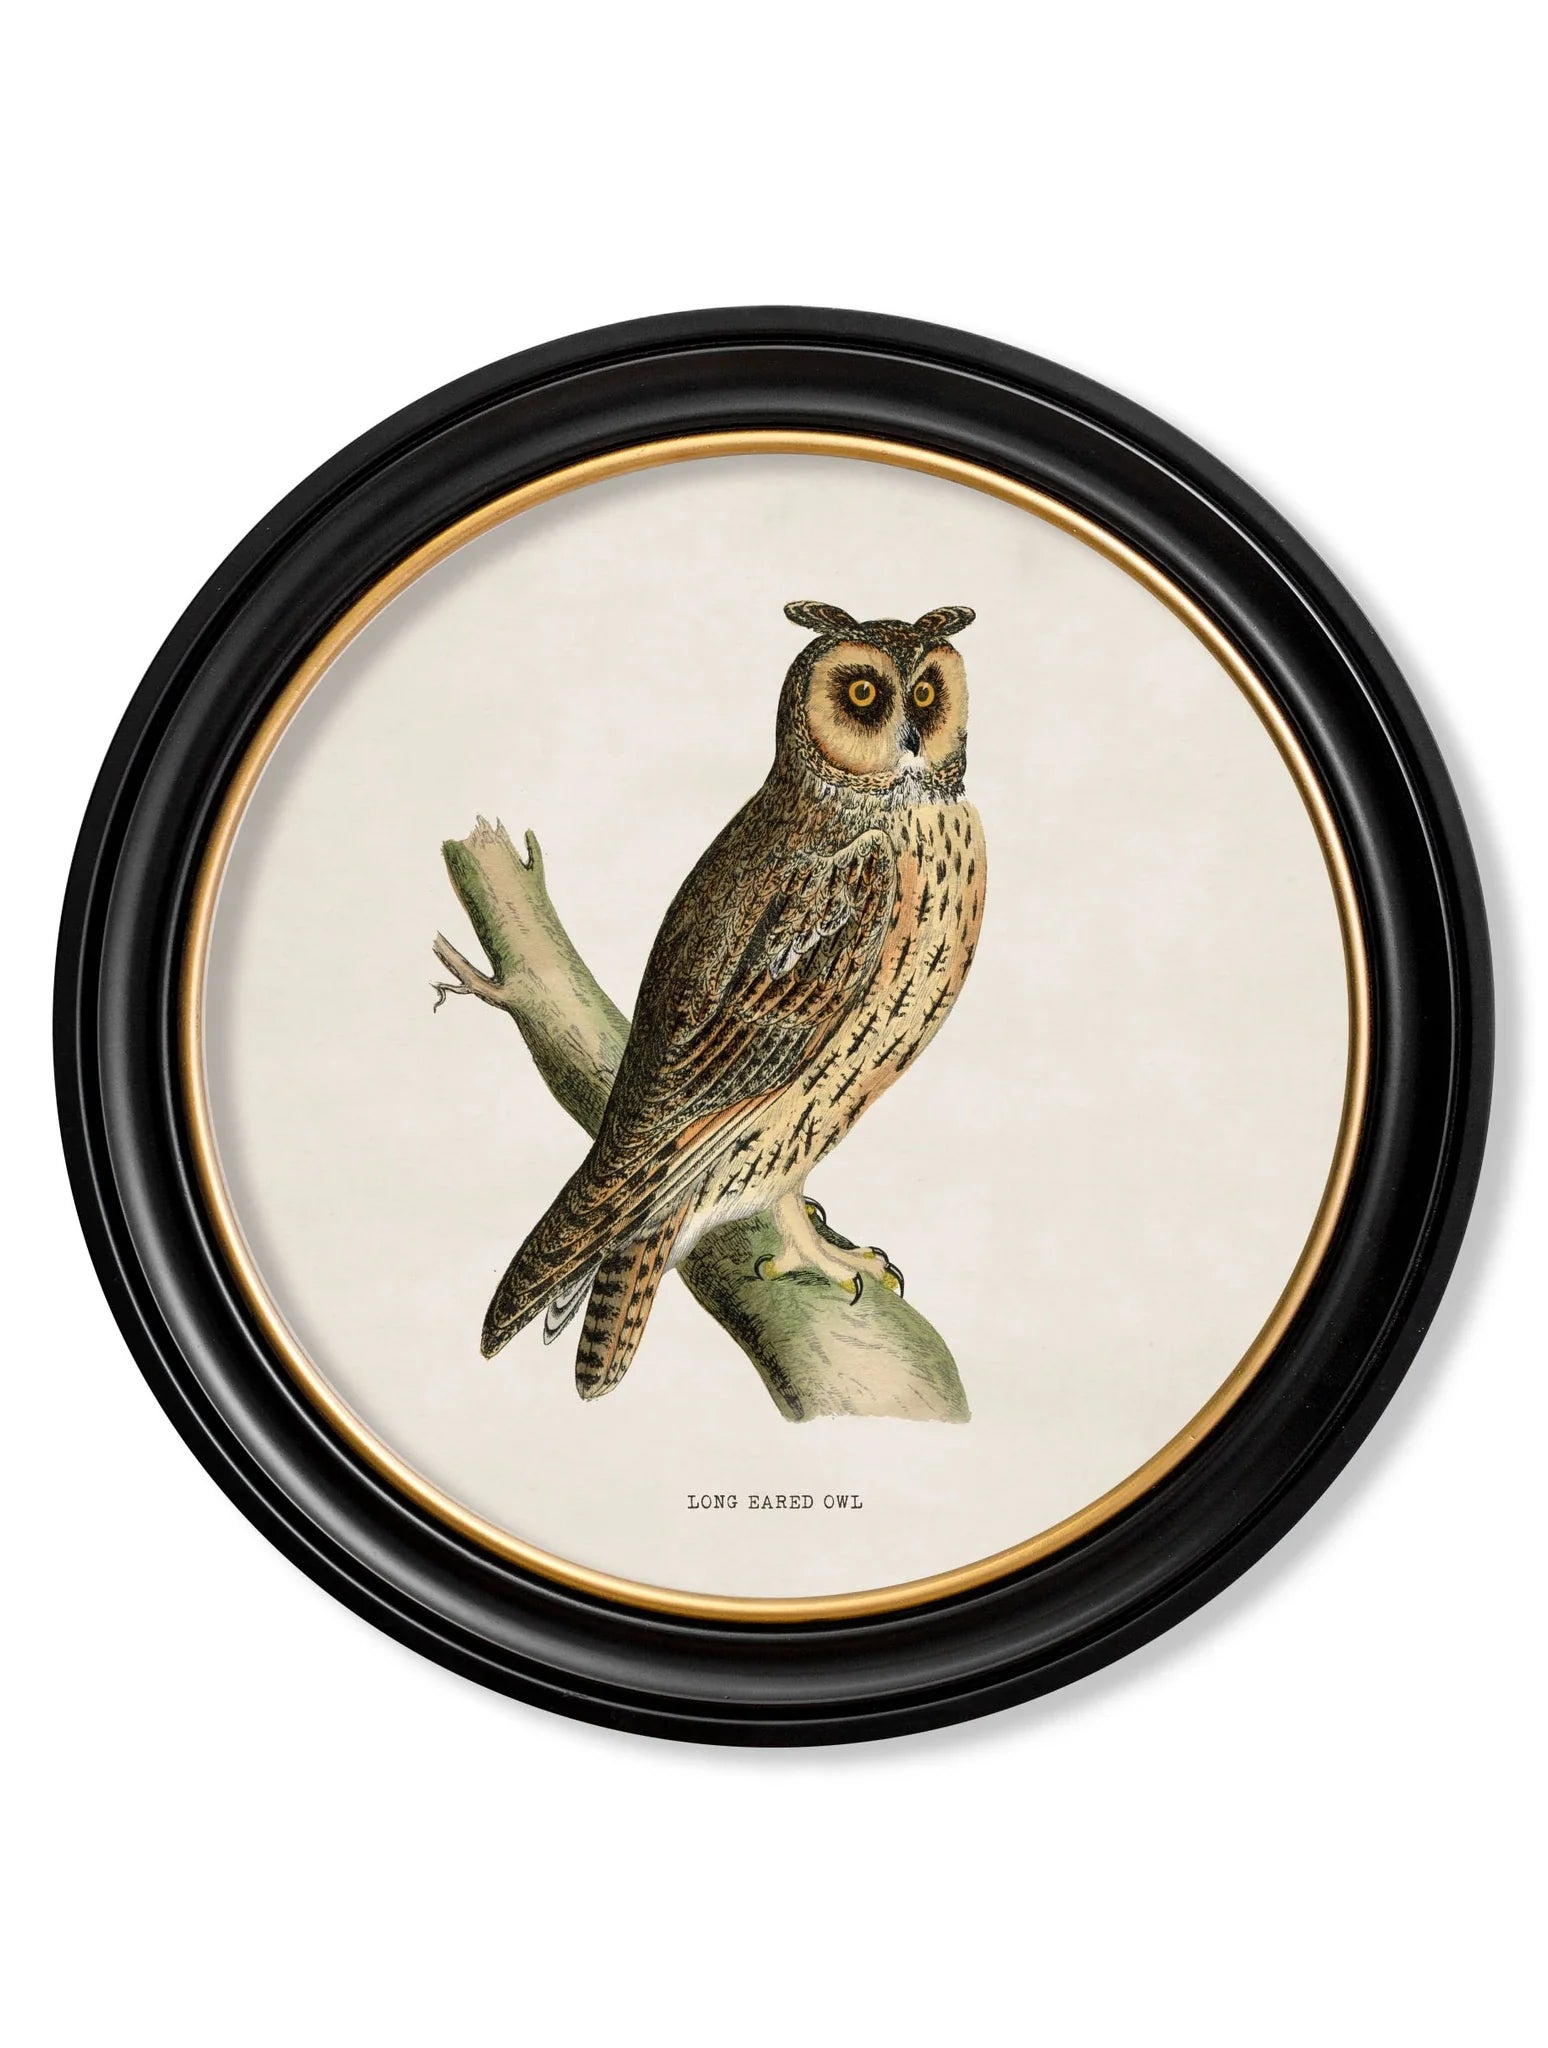 C.1870 British Owls in Round Frames for sale - Woodcock and Cavendish